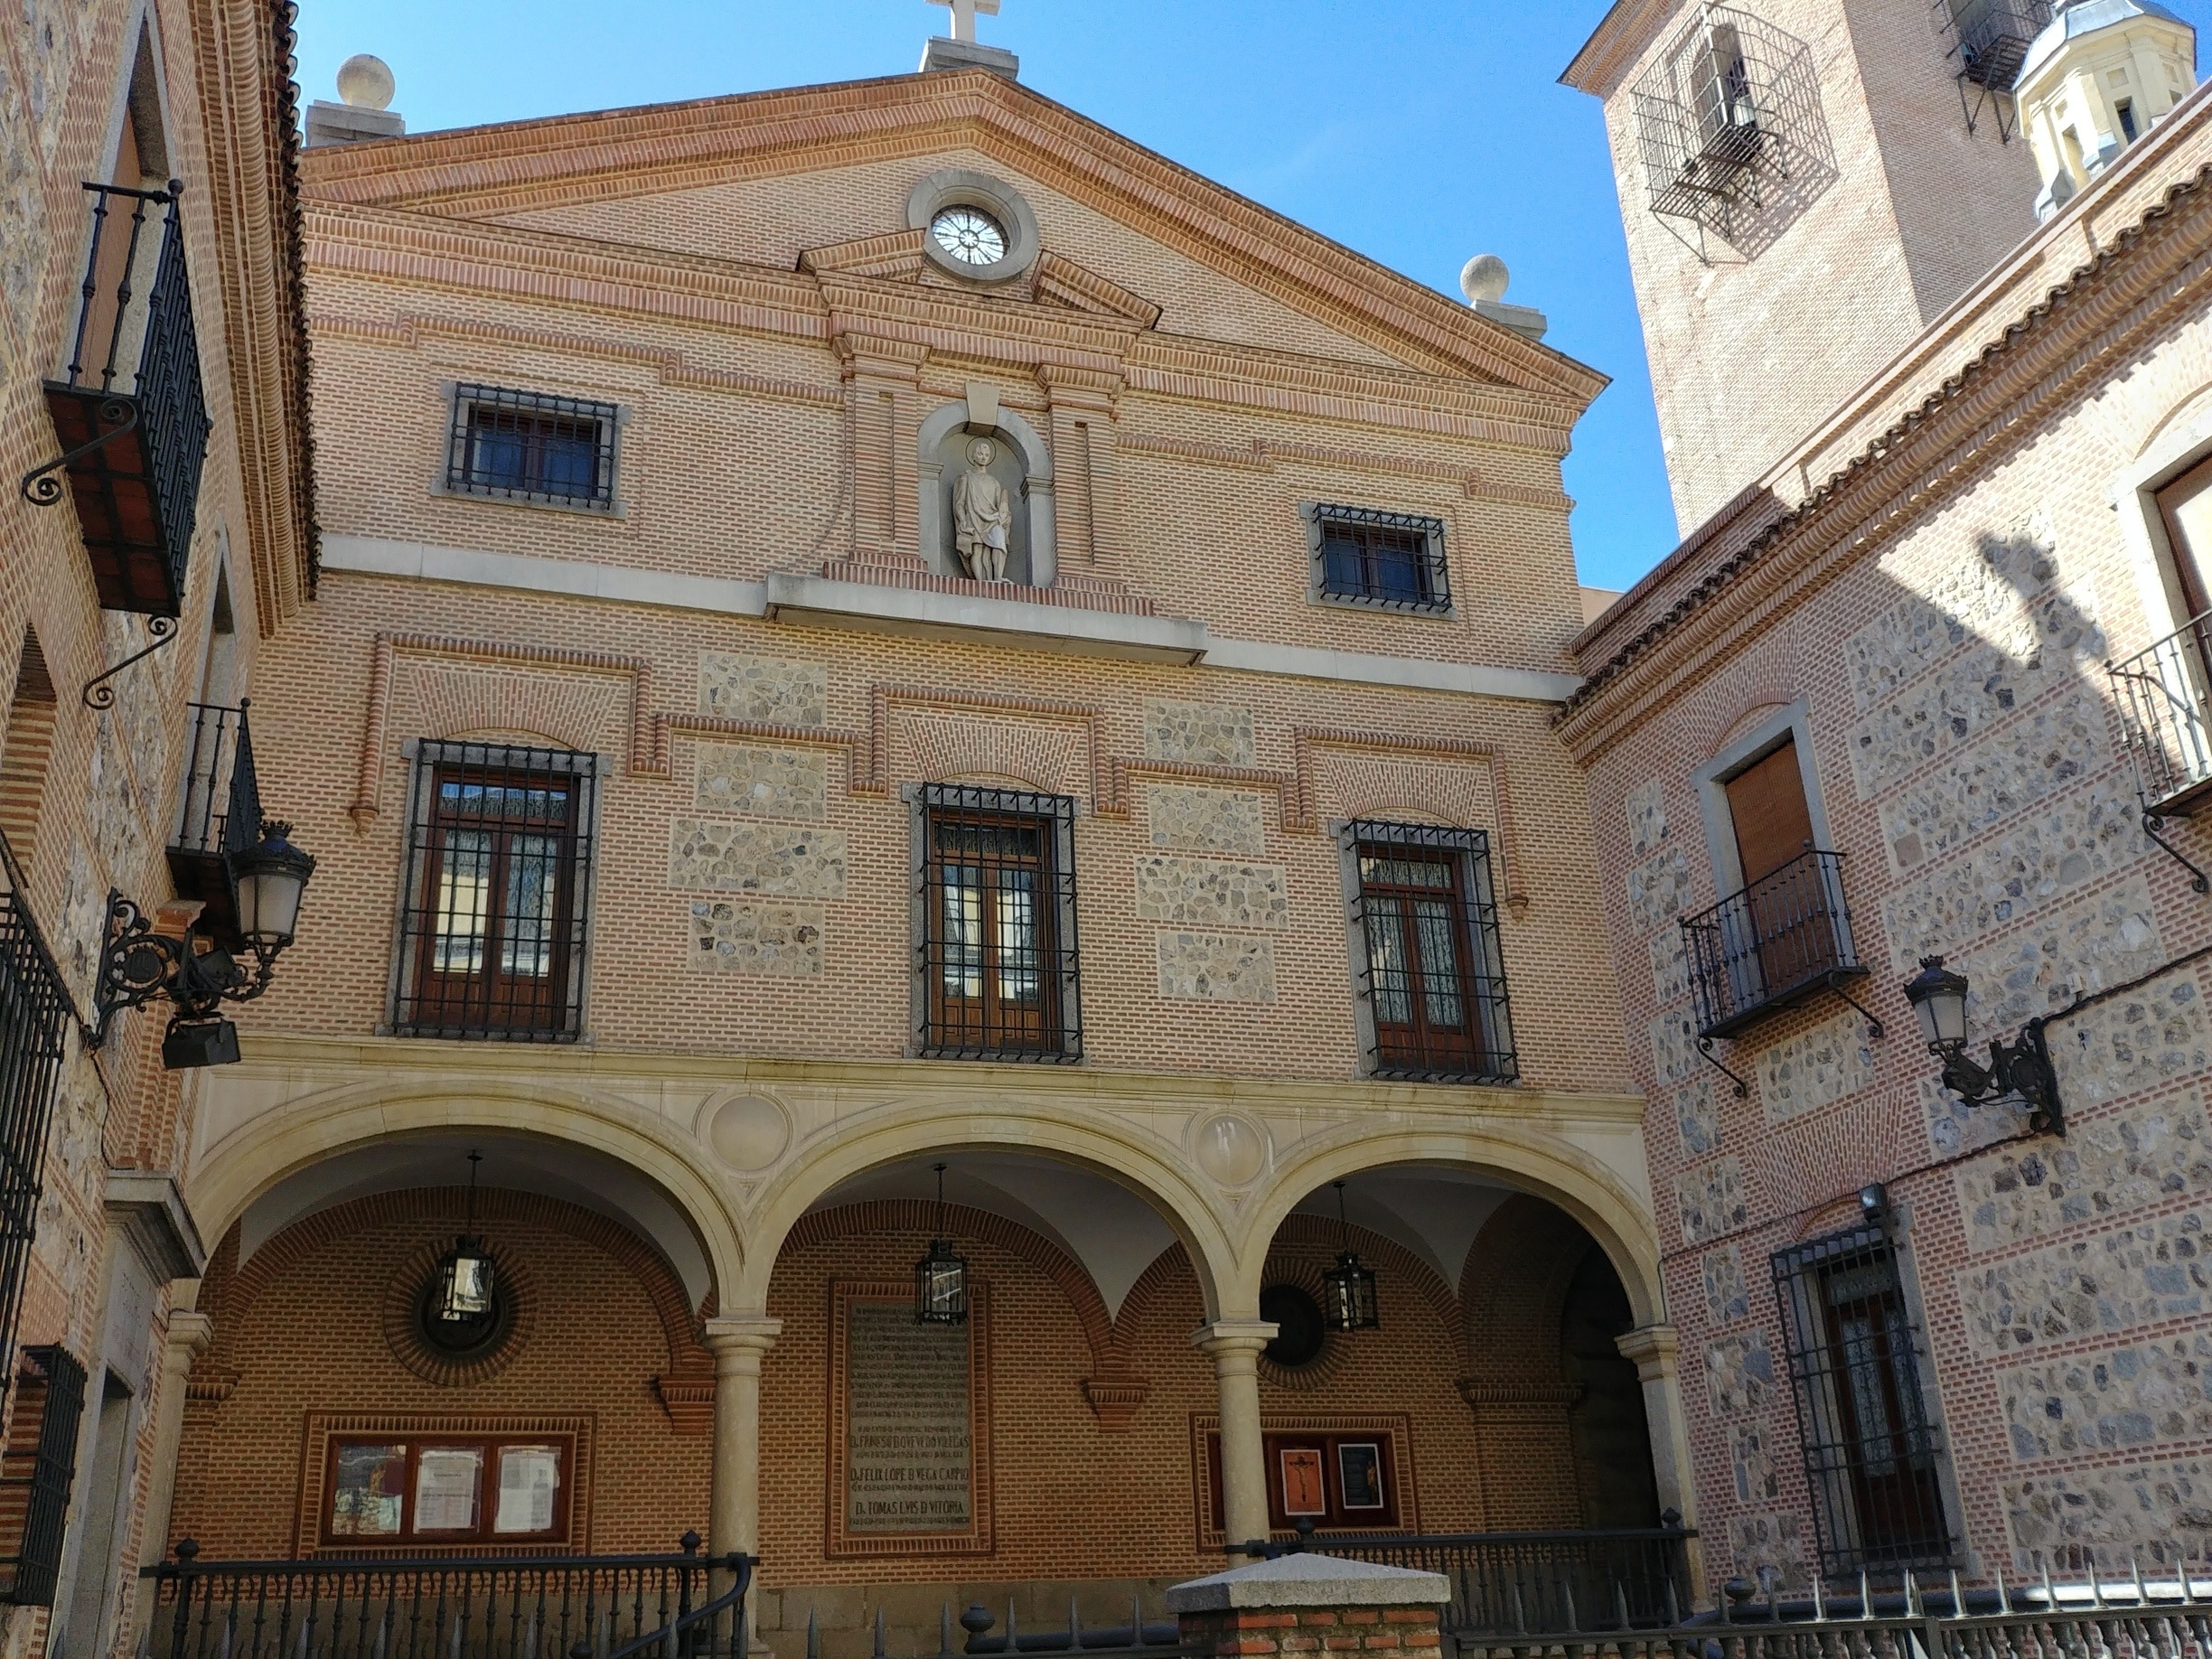 It is no so famous than the nearly chocolate shop San Gines, just behind this building. Two famous writers of the spanish XVII golden century are related to this church: Lope de Vega (wedding) and Quevedo (baptism).